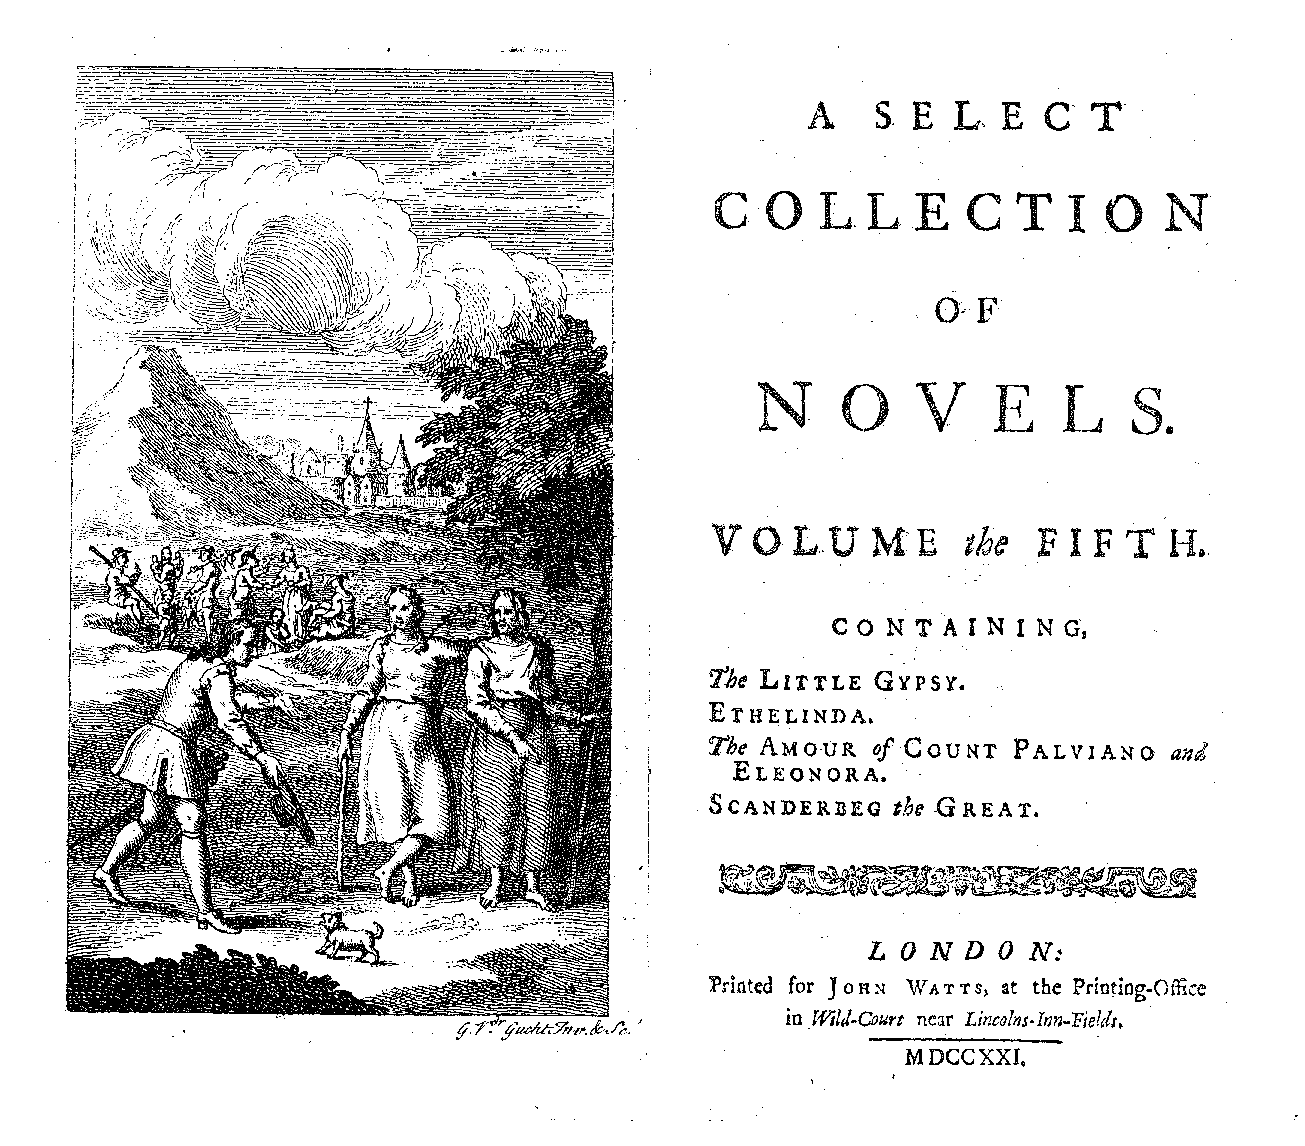 A Select Collection of Novels, 5 (London: J. Watts, 1721).